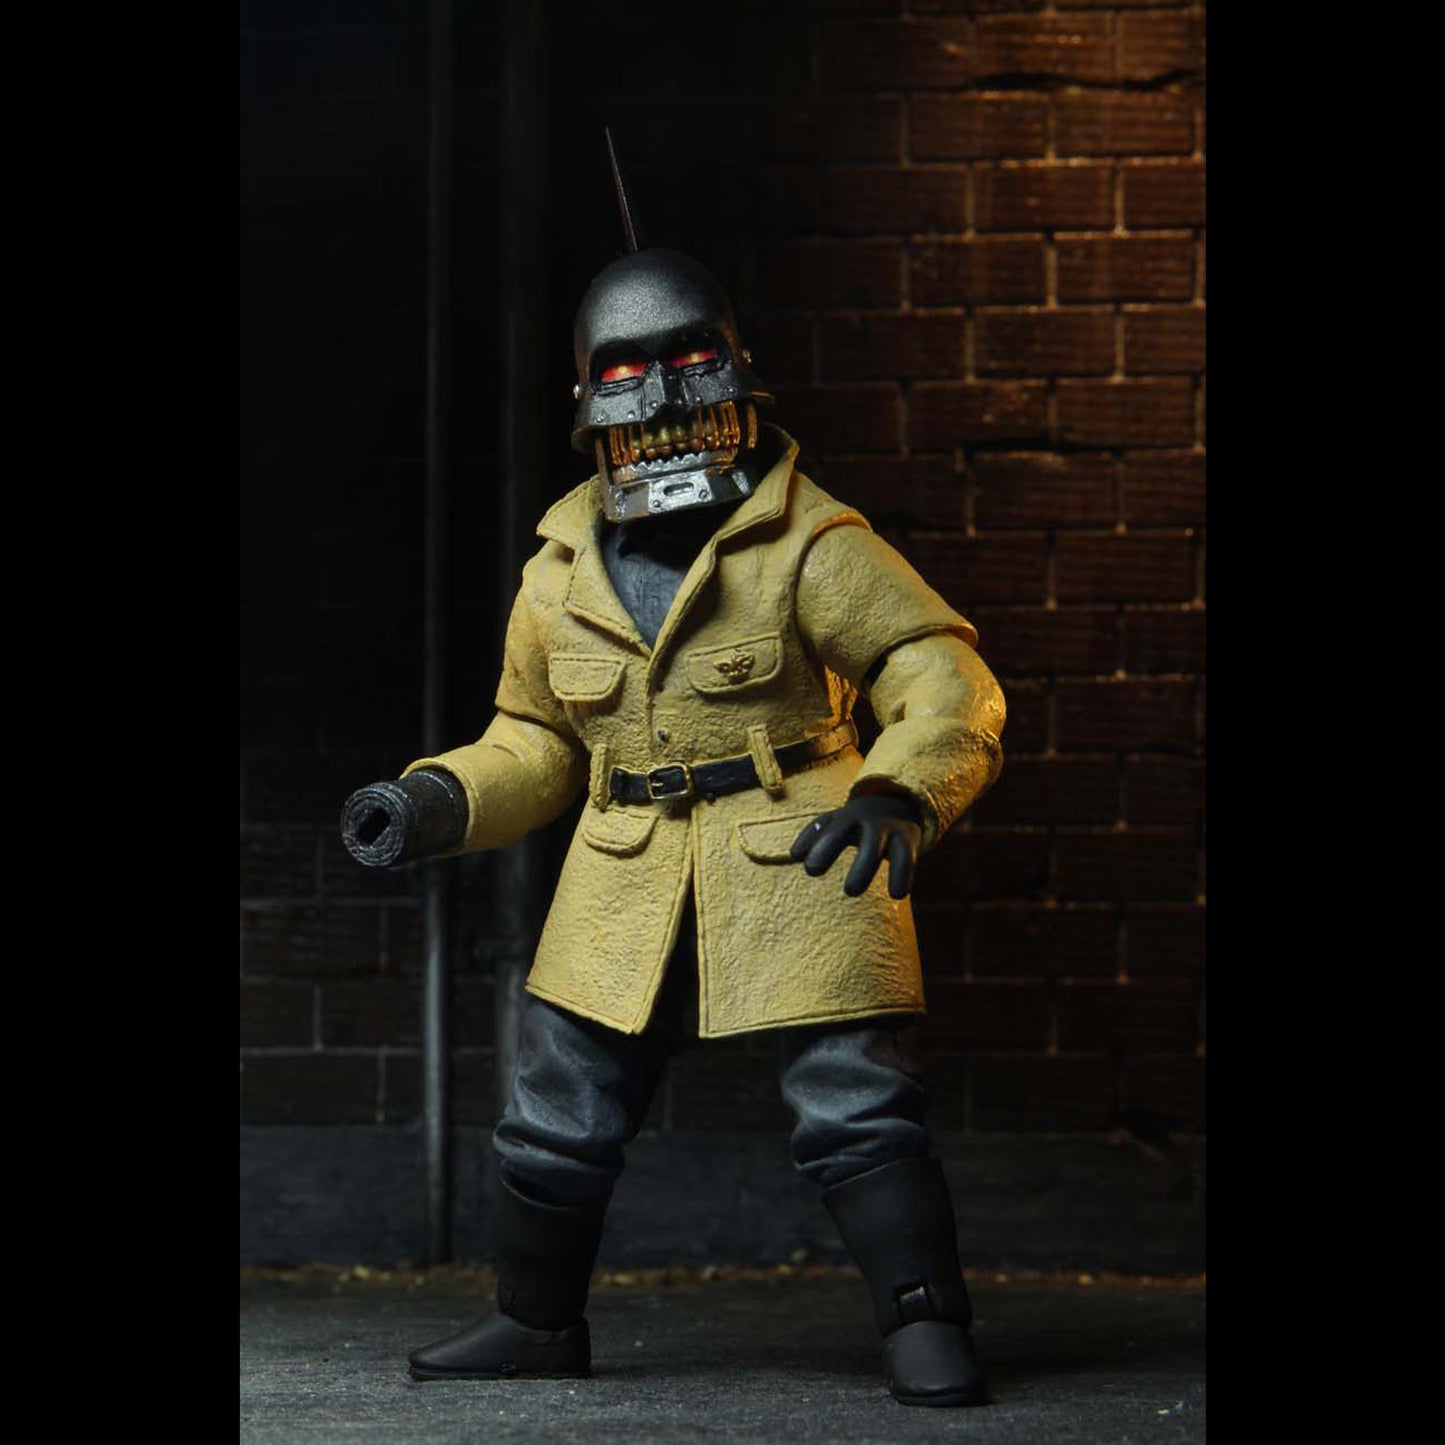 NECA: Puppet Master Blade & Torch 2 Pack 4.25” Tall Action Figure